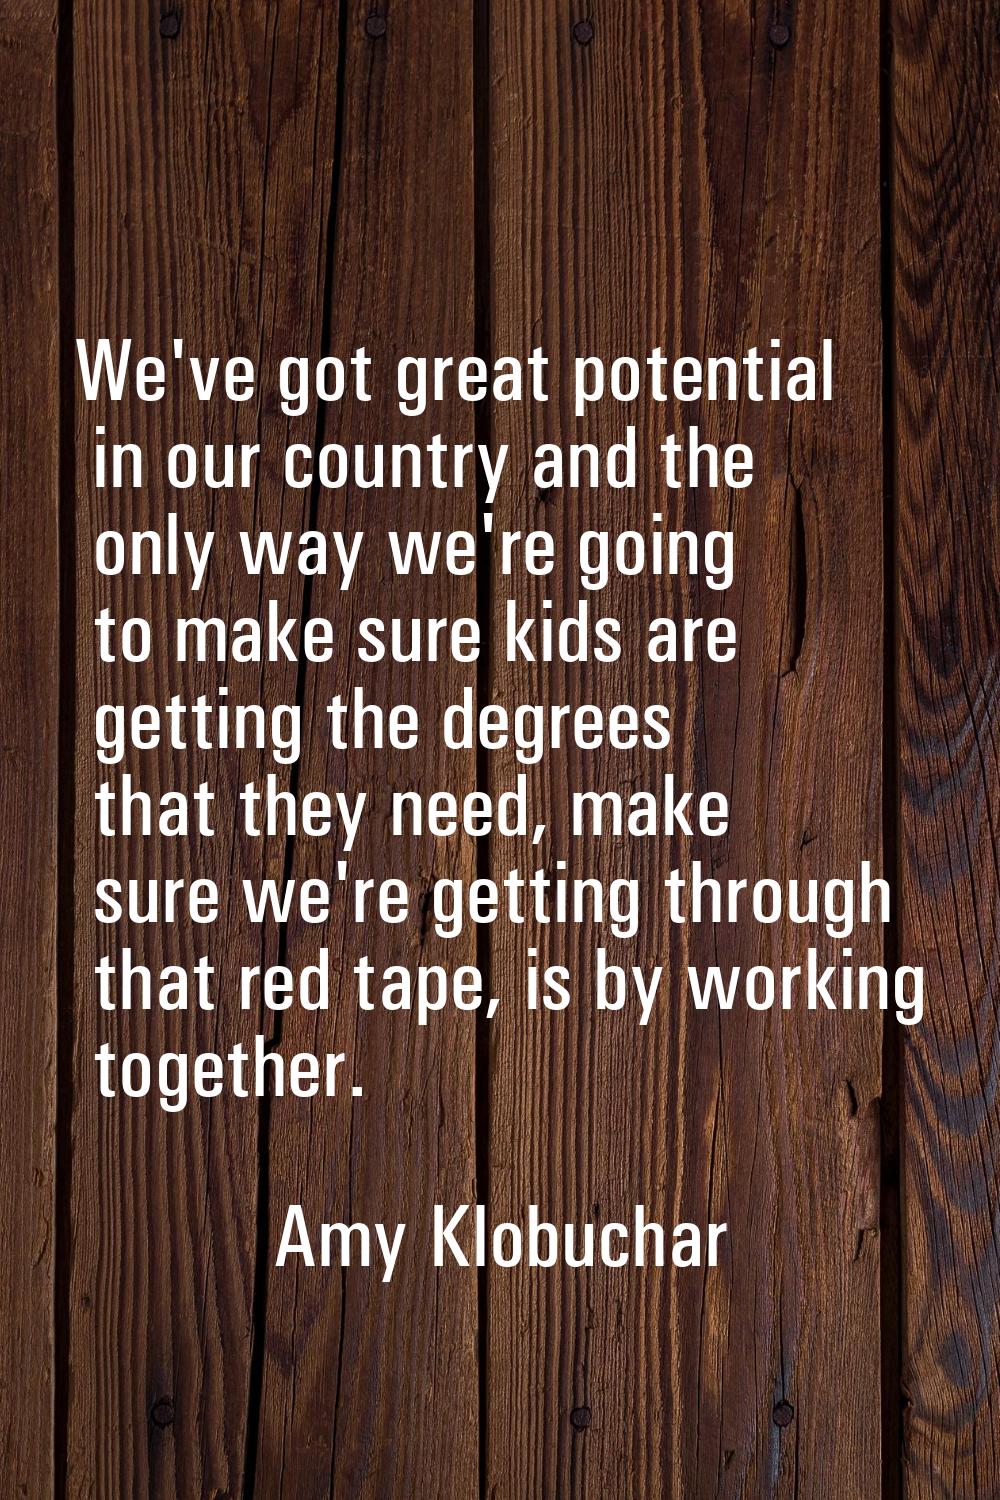 We've got great potential in our country and the only way we're going to make sure kids are getting